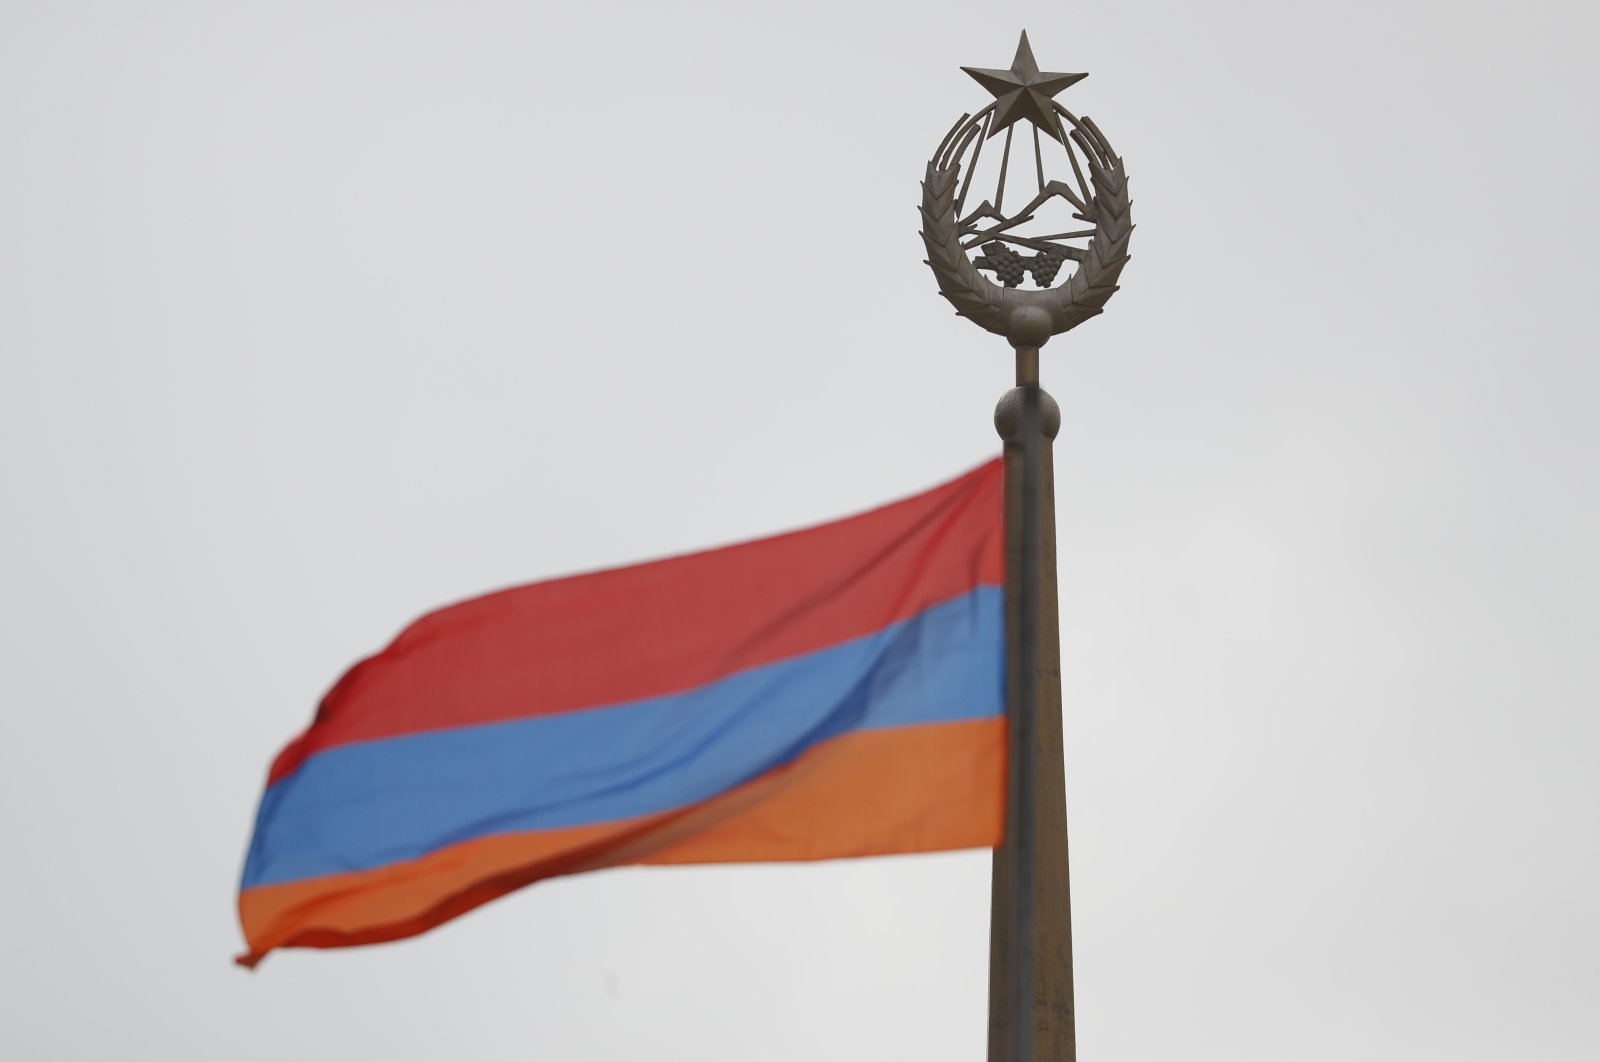 The Armenian national flag flaps at a railway station building in Yerevan, Armenia, April 18, 2018. (Getty Images)